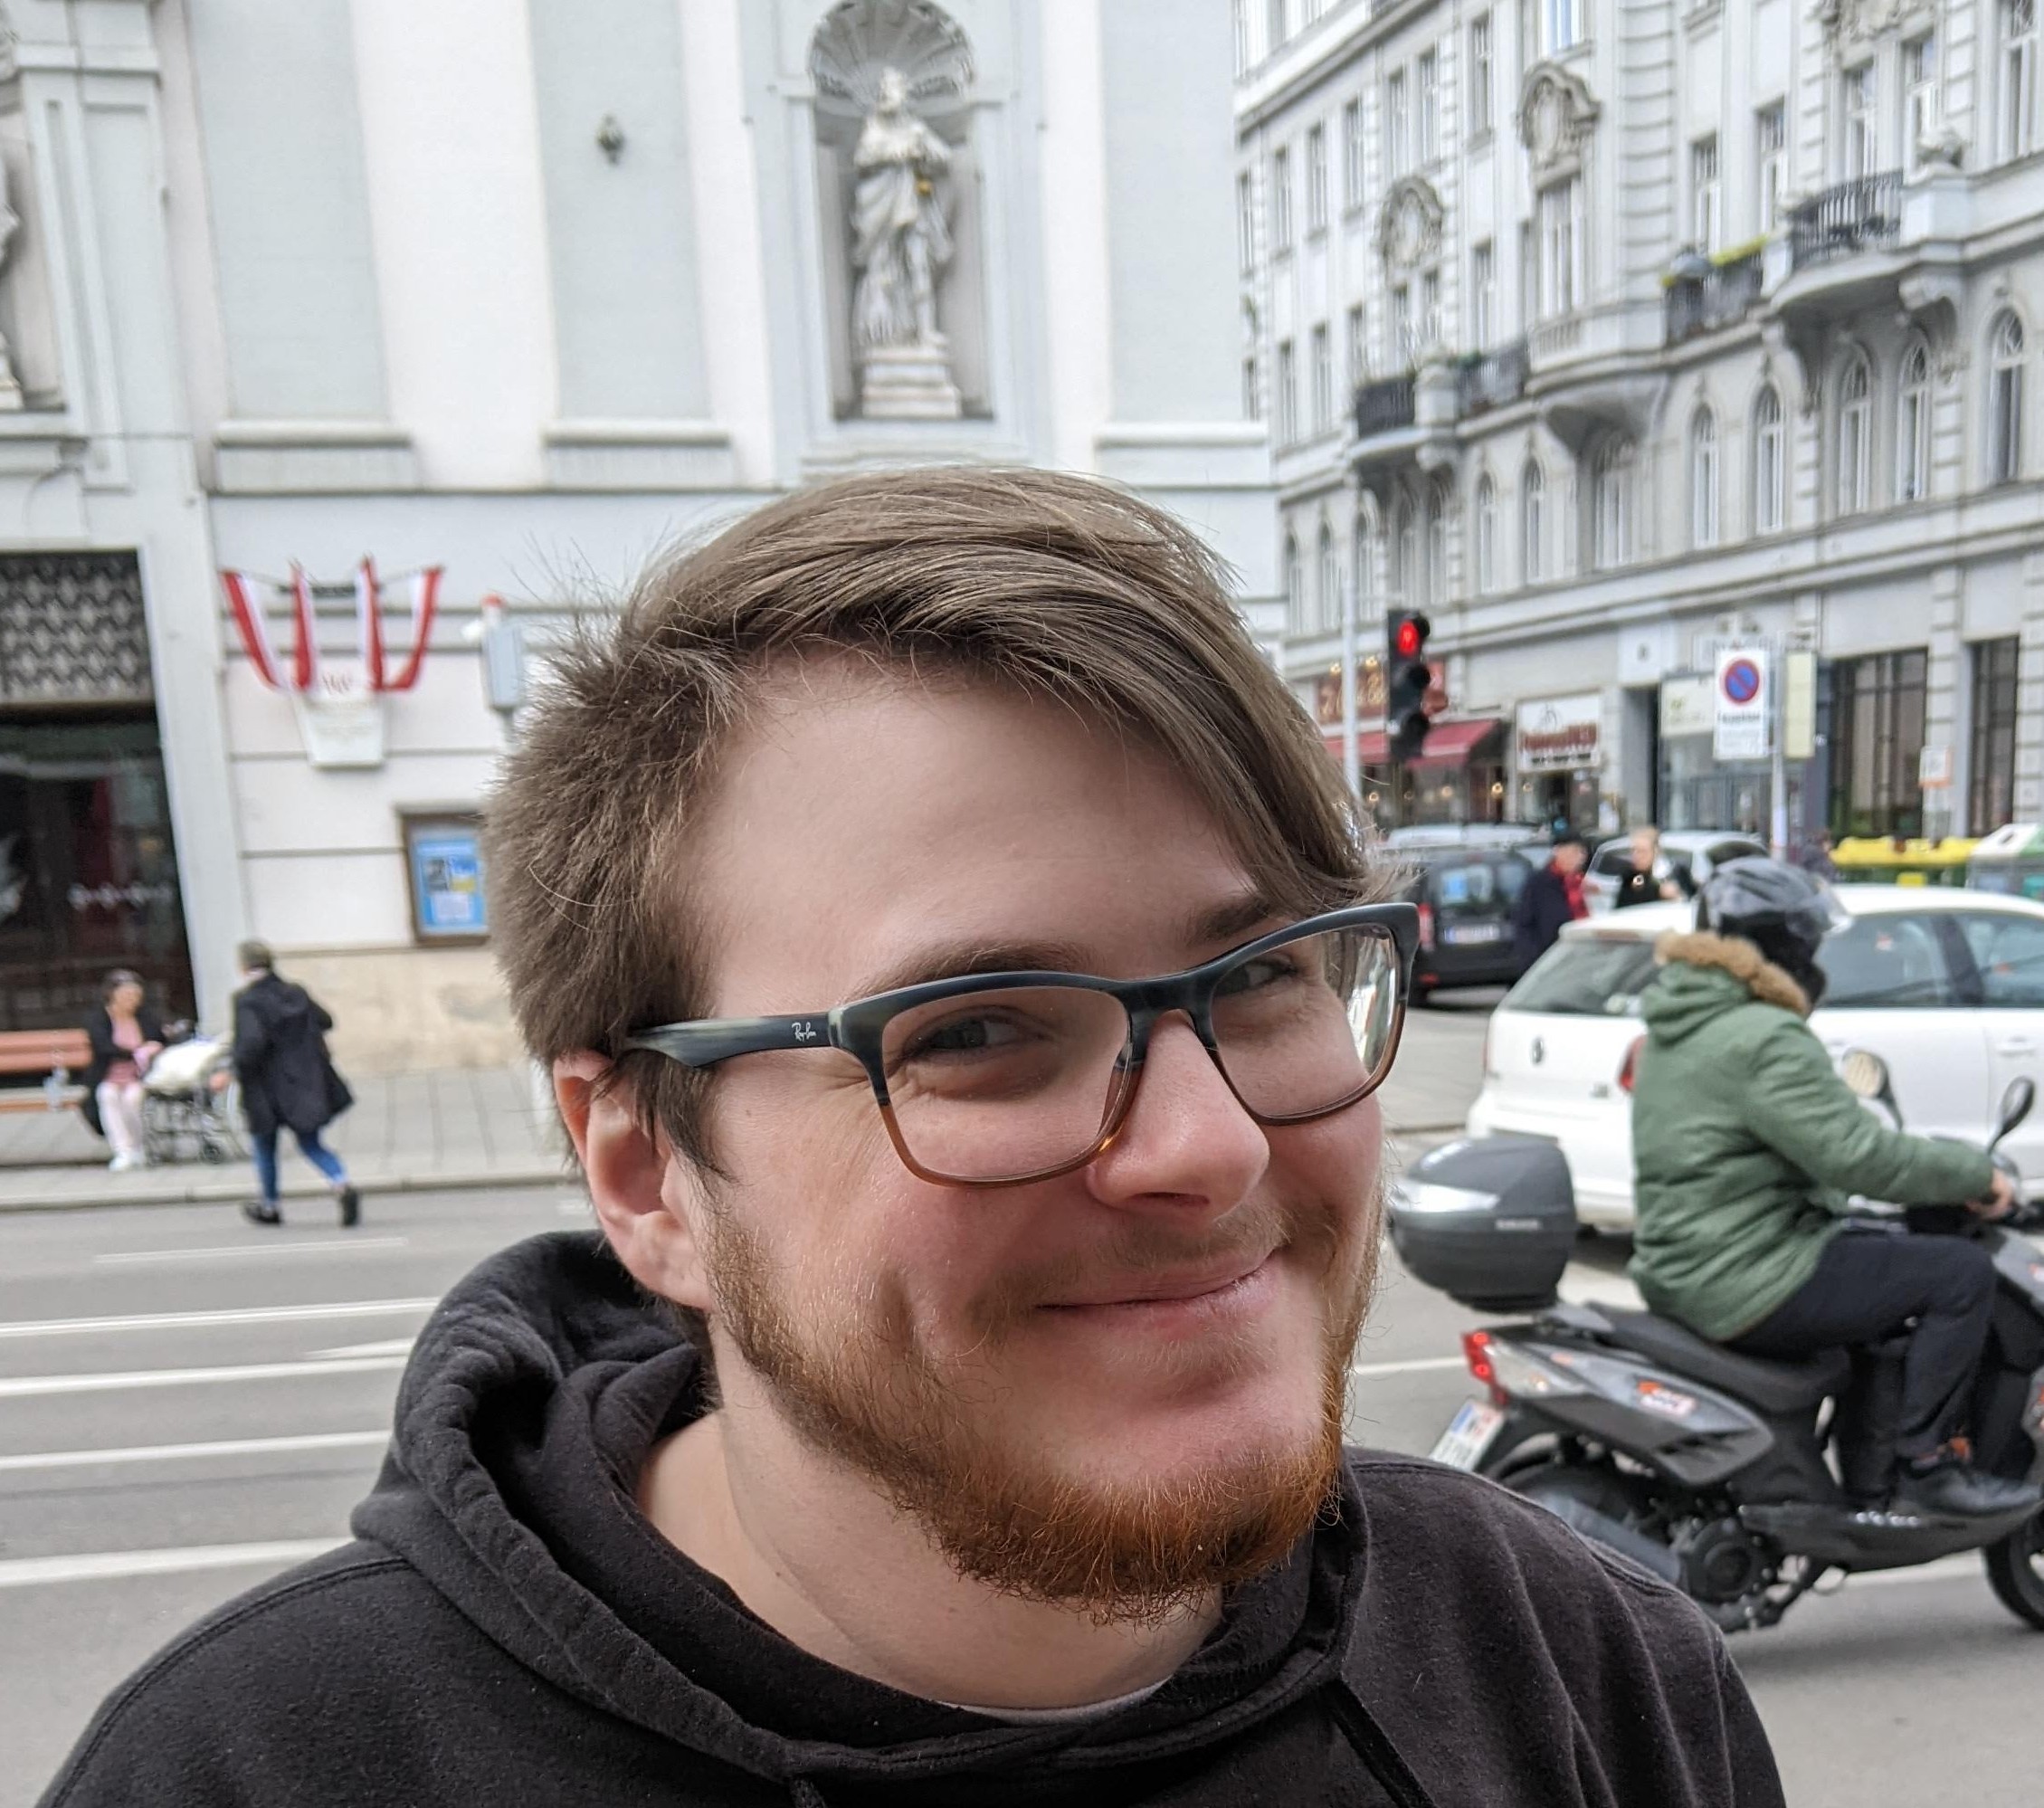 Andy is a white man in his mid-thirties with dark blonde hair, cut short on the sides and grown long in the middle and pushed to the side. He has round cheeks, deep dimples and blue eyes squinted in a smile. He has a short beard that is reddish brown. He wears glasses with blue and brown frames.